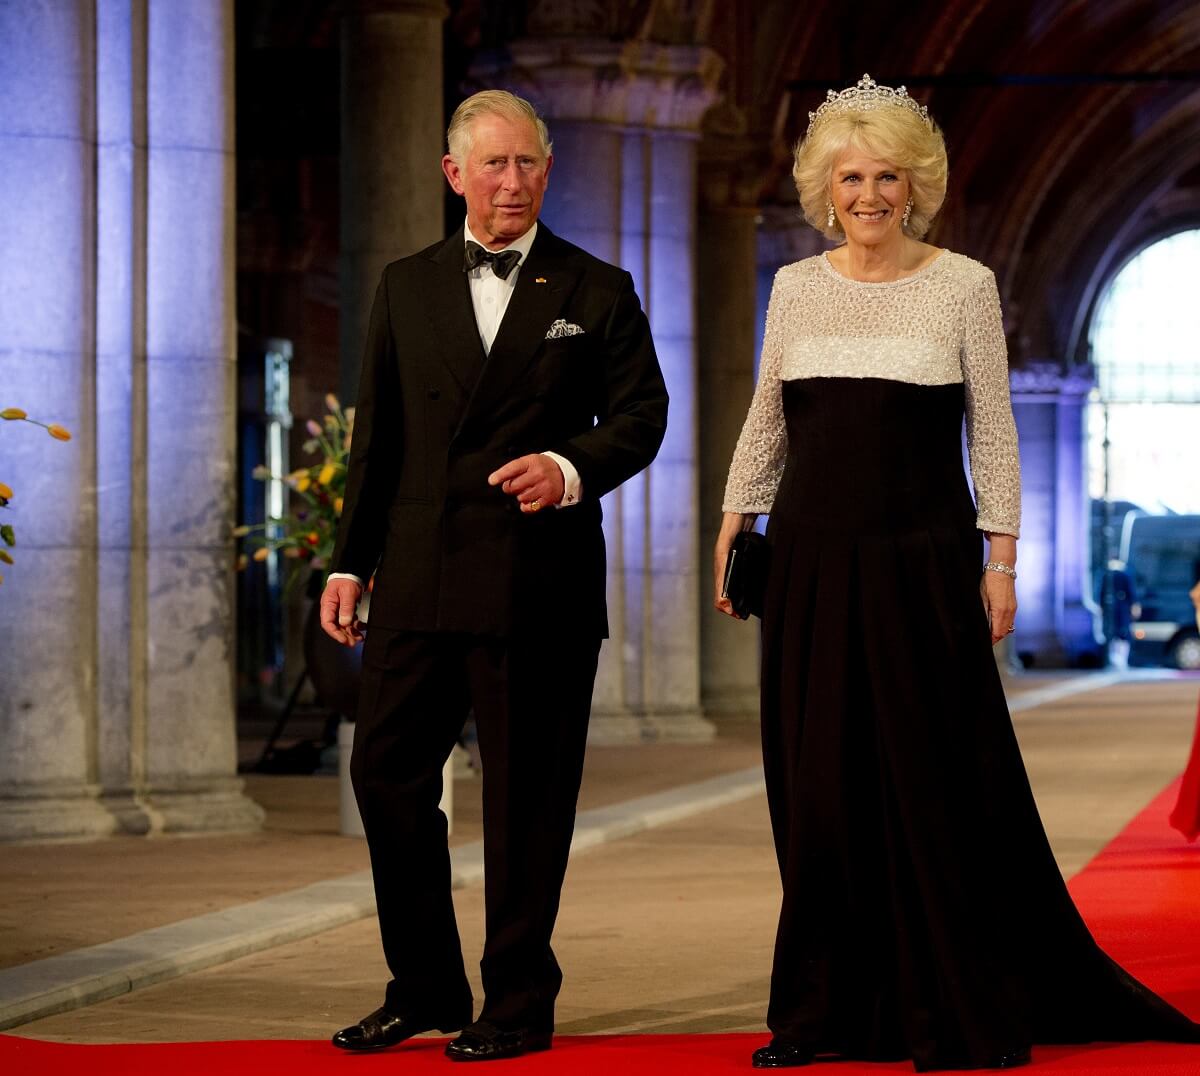 Now-King Charles III and Camilla Parker Bowles (now-Queen Camilla) attend a dinner hosted by Queen Beatrix of The Netherlands